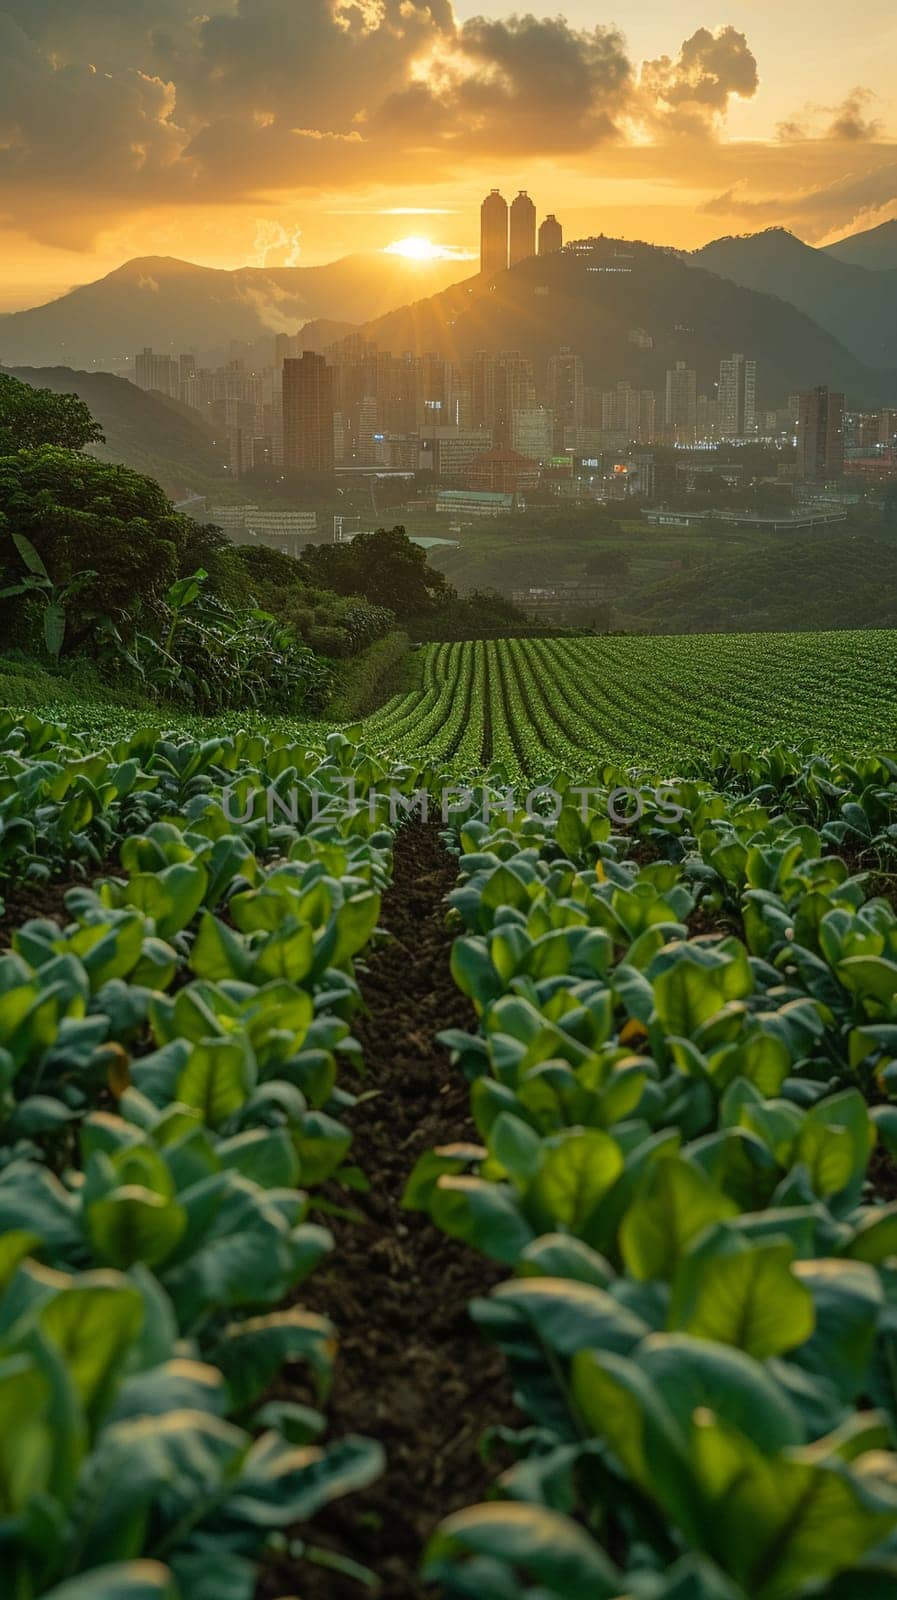 Farmers Tending to Crops in a Fertile Field with Soft Sunrise The gentle blur of workers and land suggests the timeless rhythm of agriculture. Urban Skyline Overlooking Bustling Financial District.